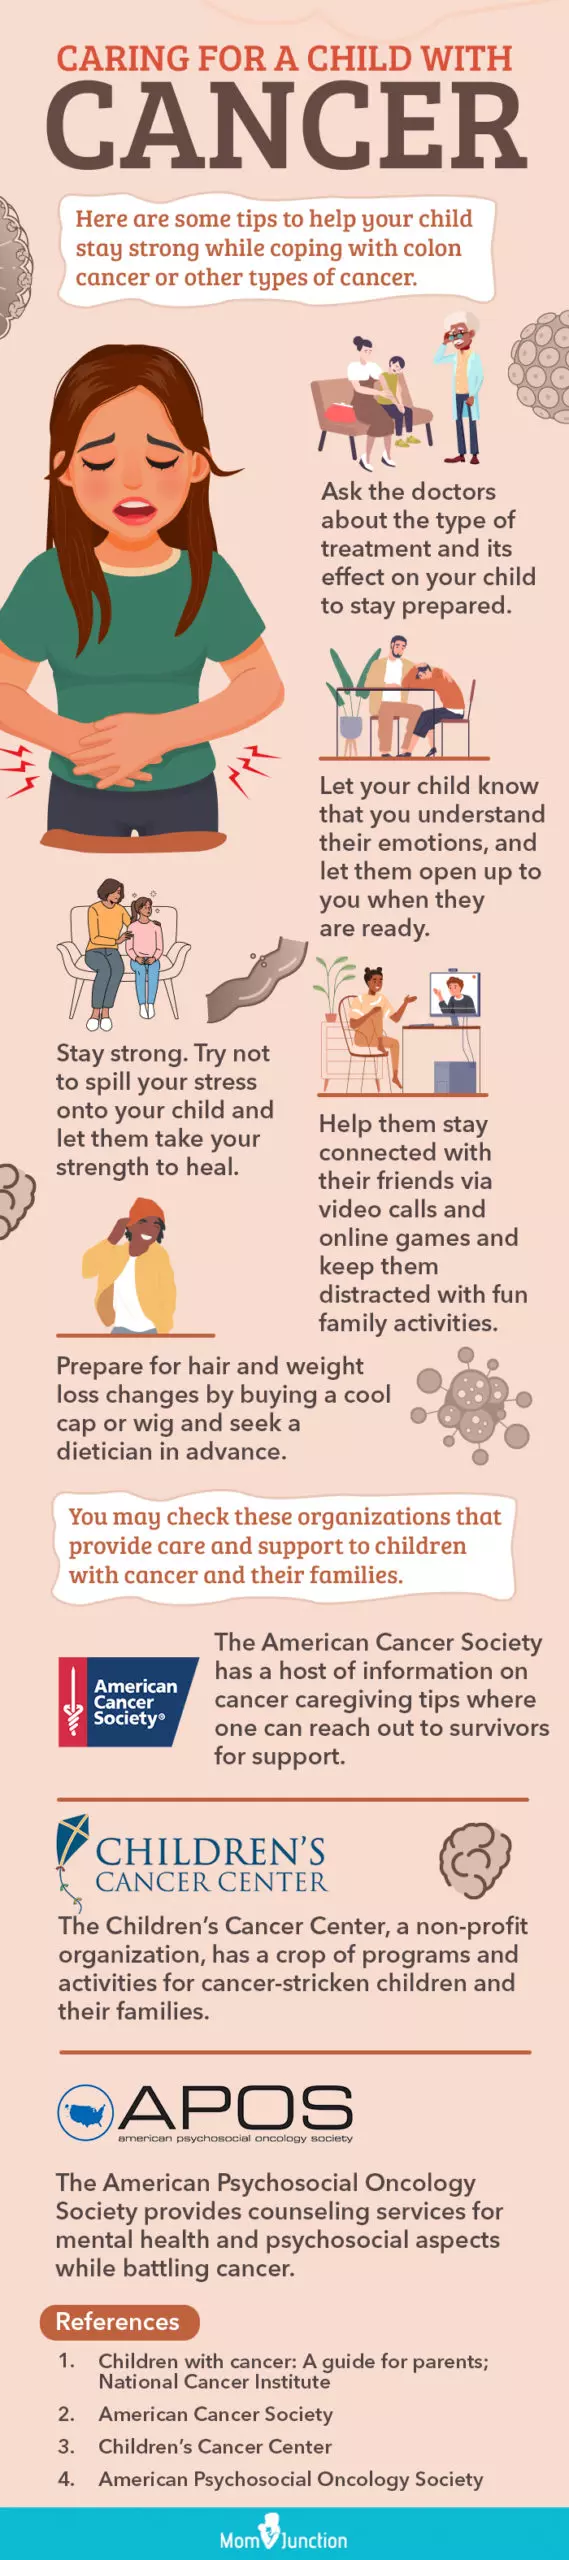 caring for a child with cancer (infographic)